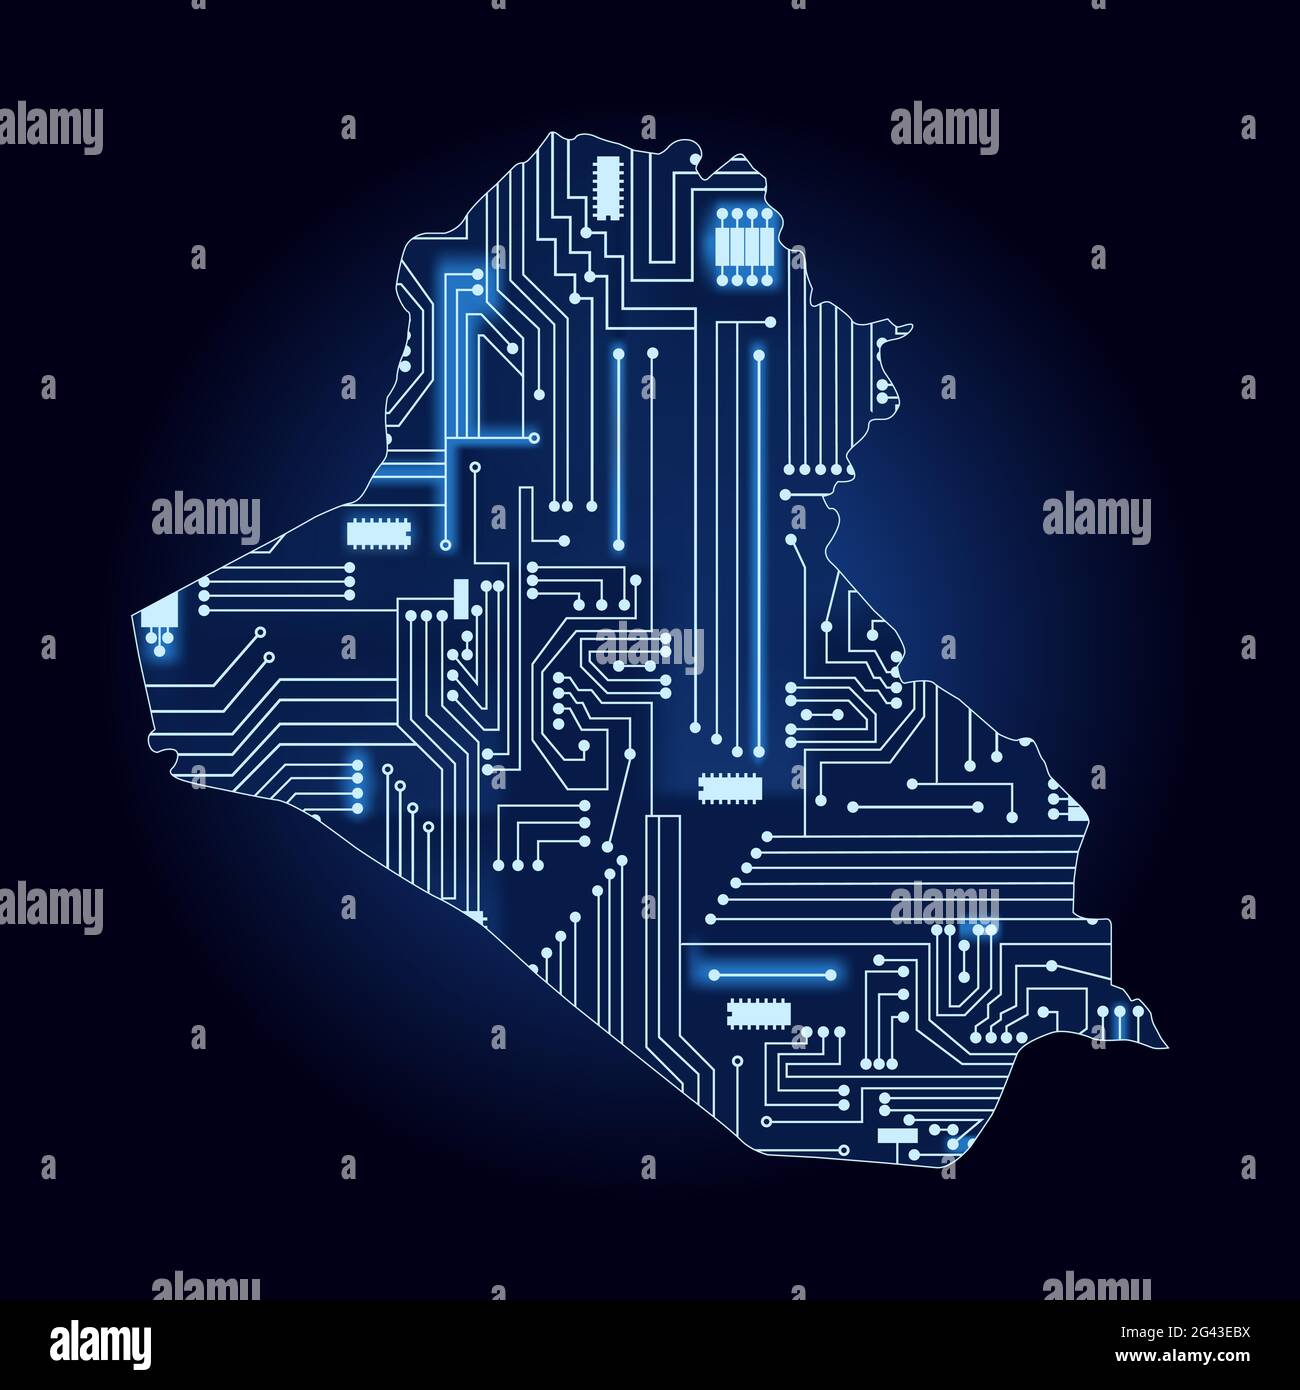 Contour map of Iraq with a technological electronics circuit. Stock Vector